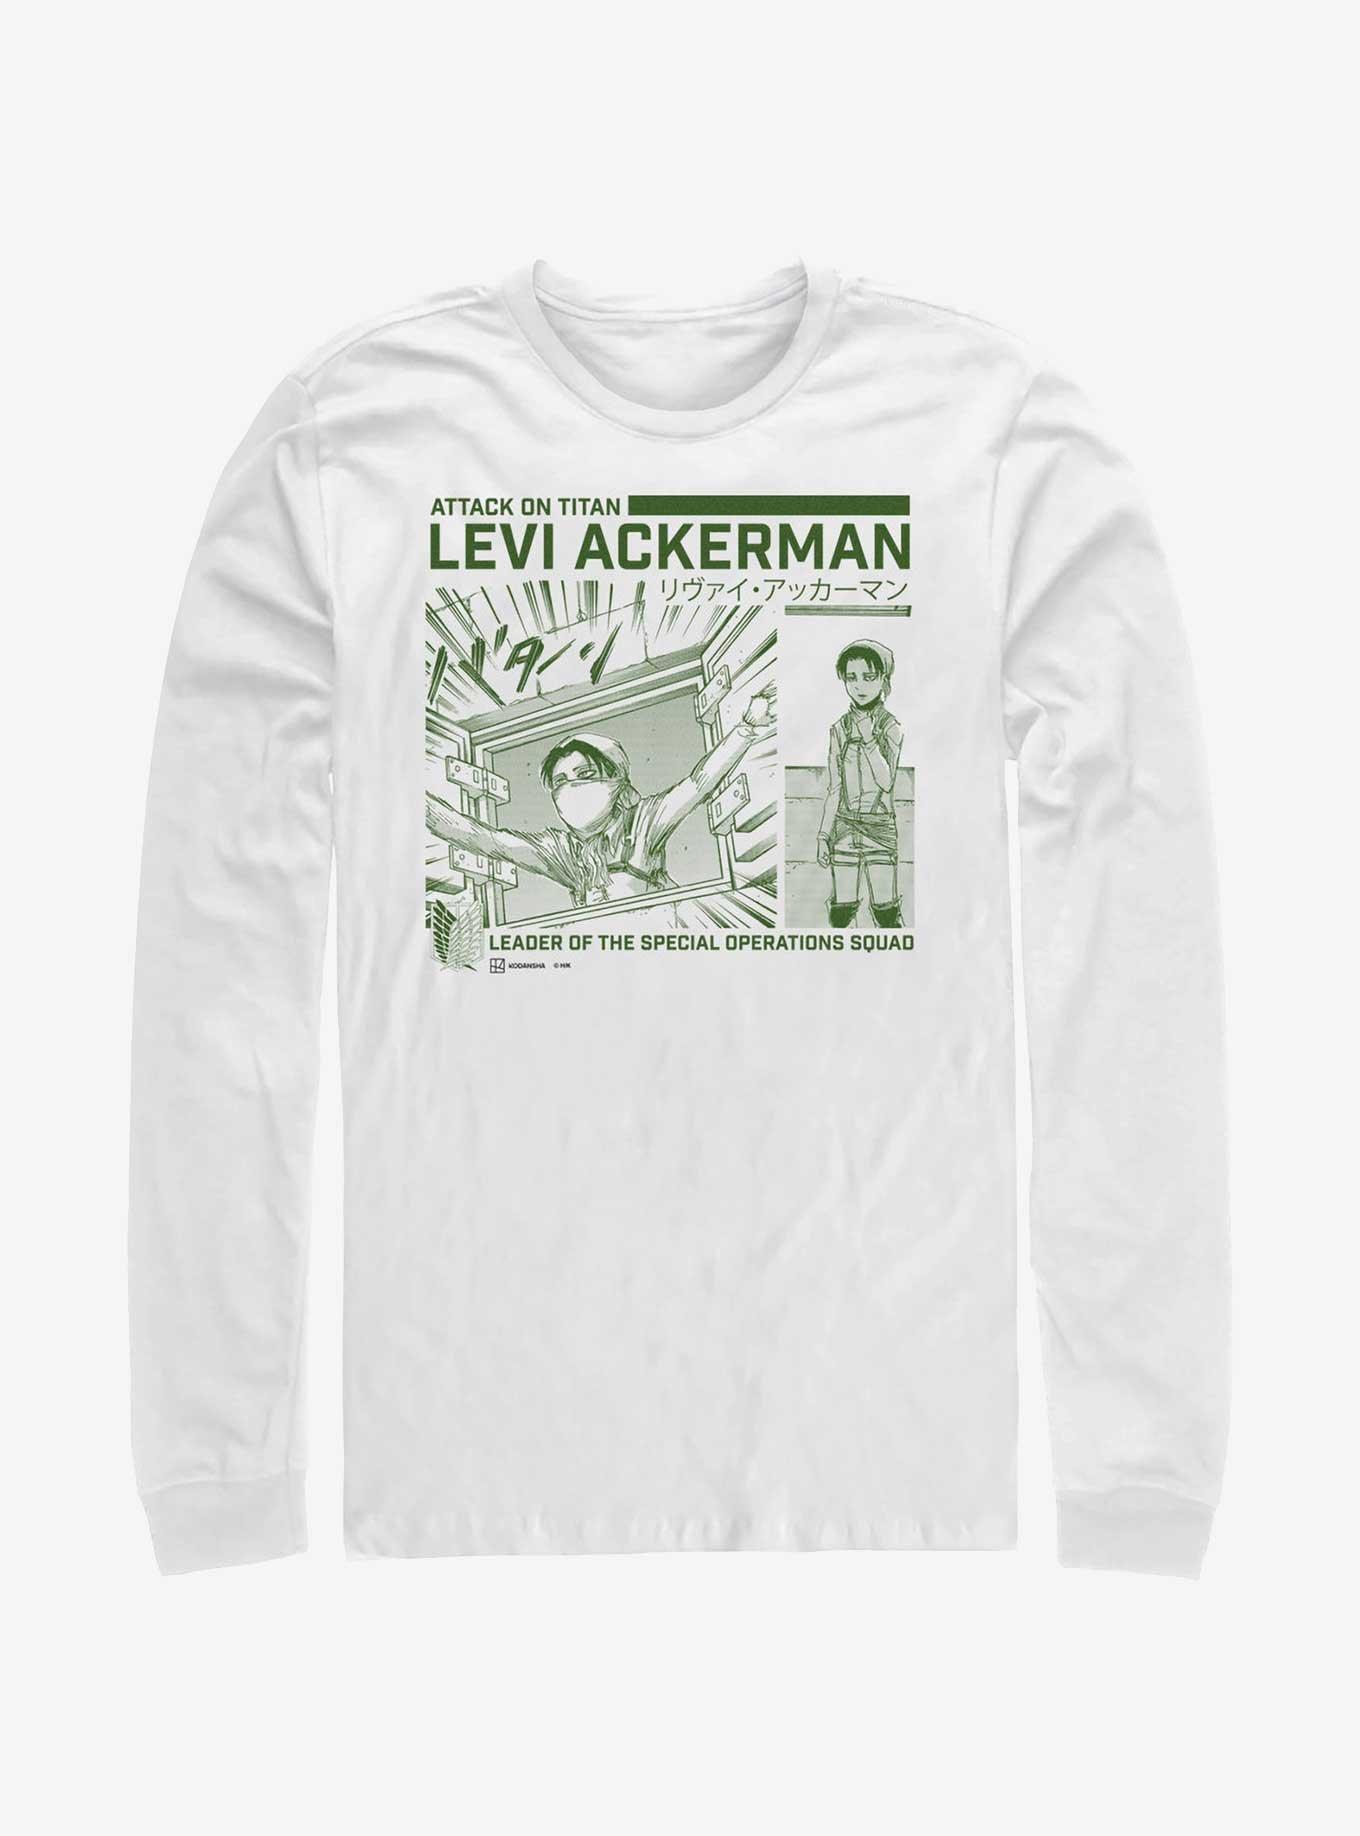 Attack On Titan Special Operations Squad Levi Ackerman Long-Sleeve T-Shirt